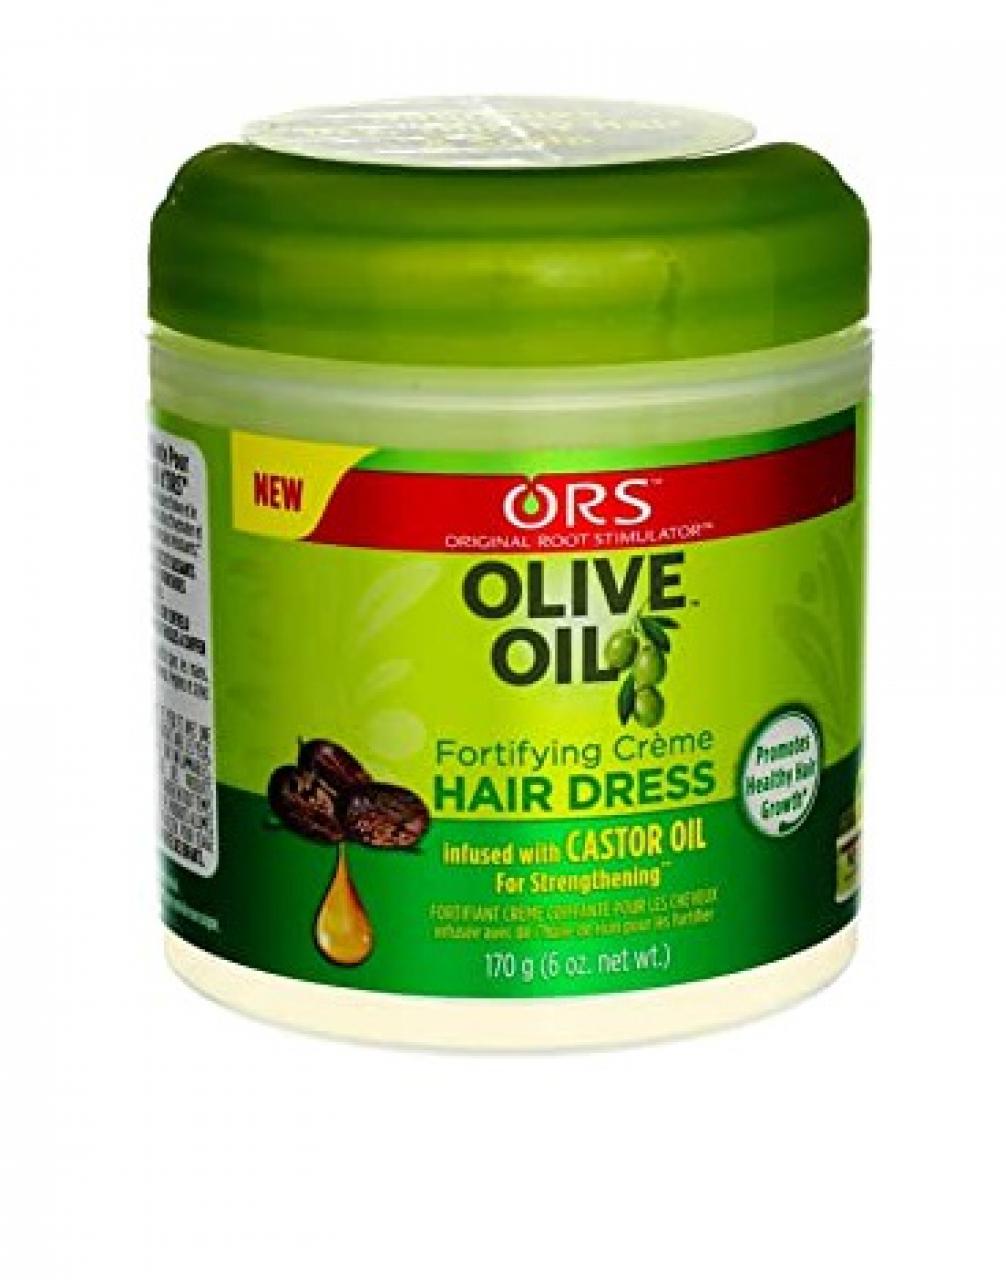 ORS Olive oil fortifying creme